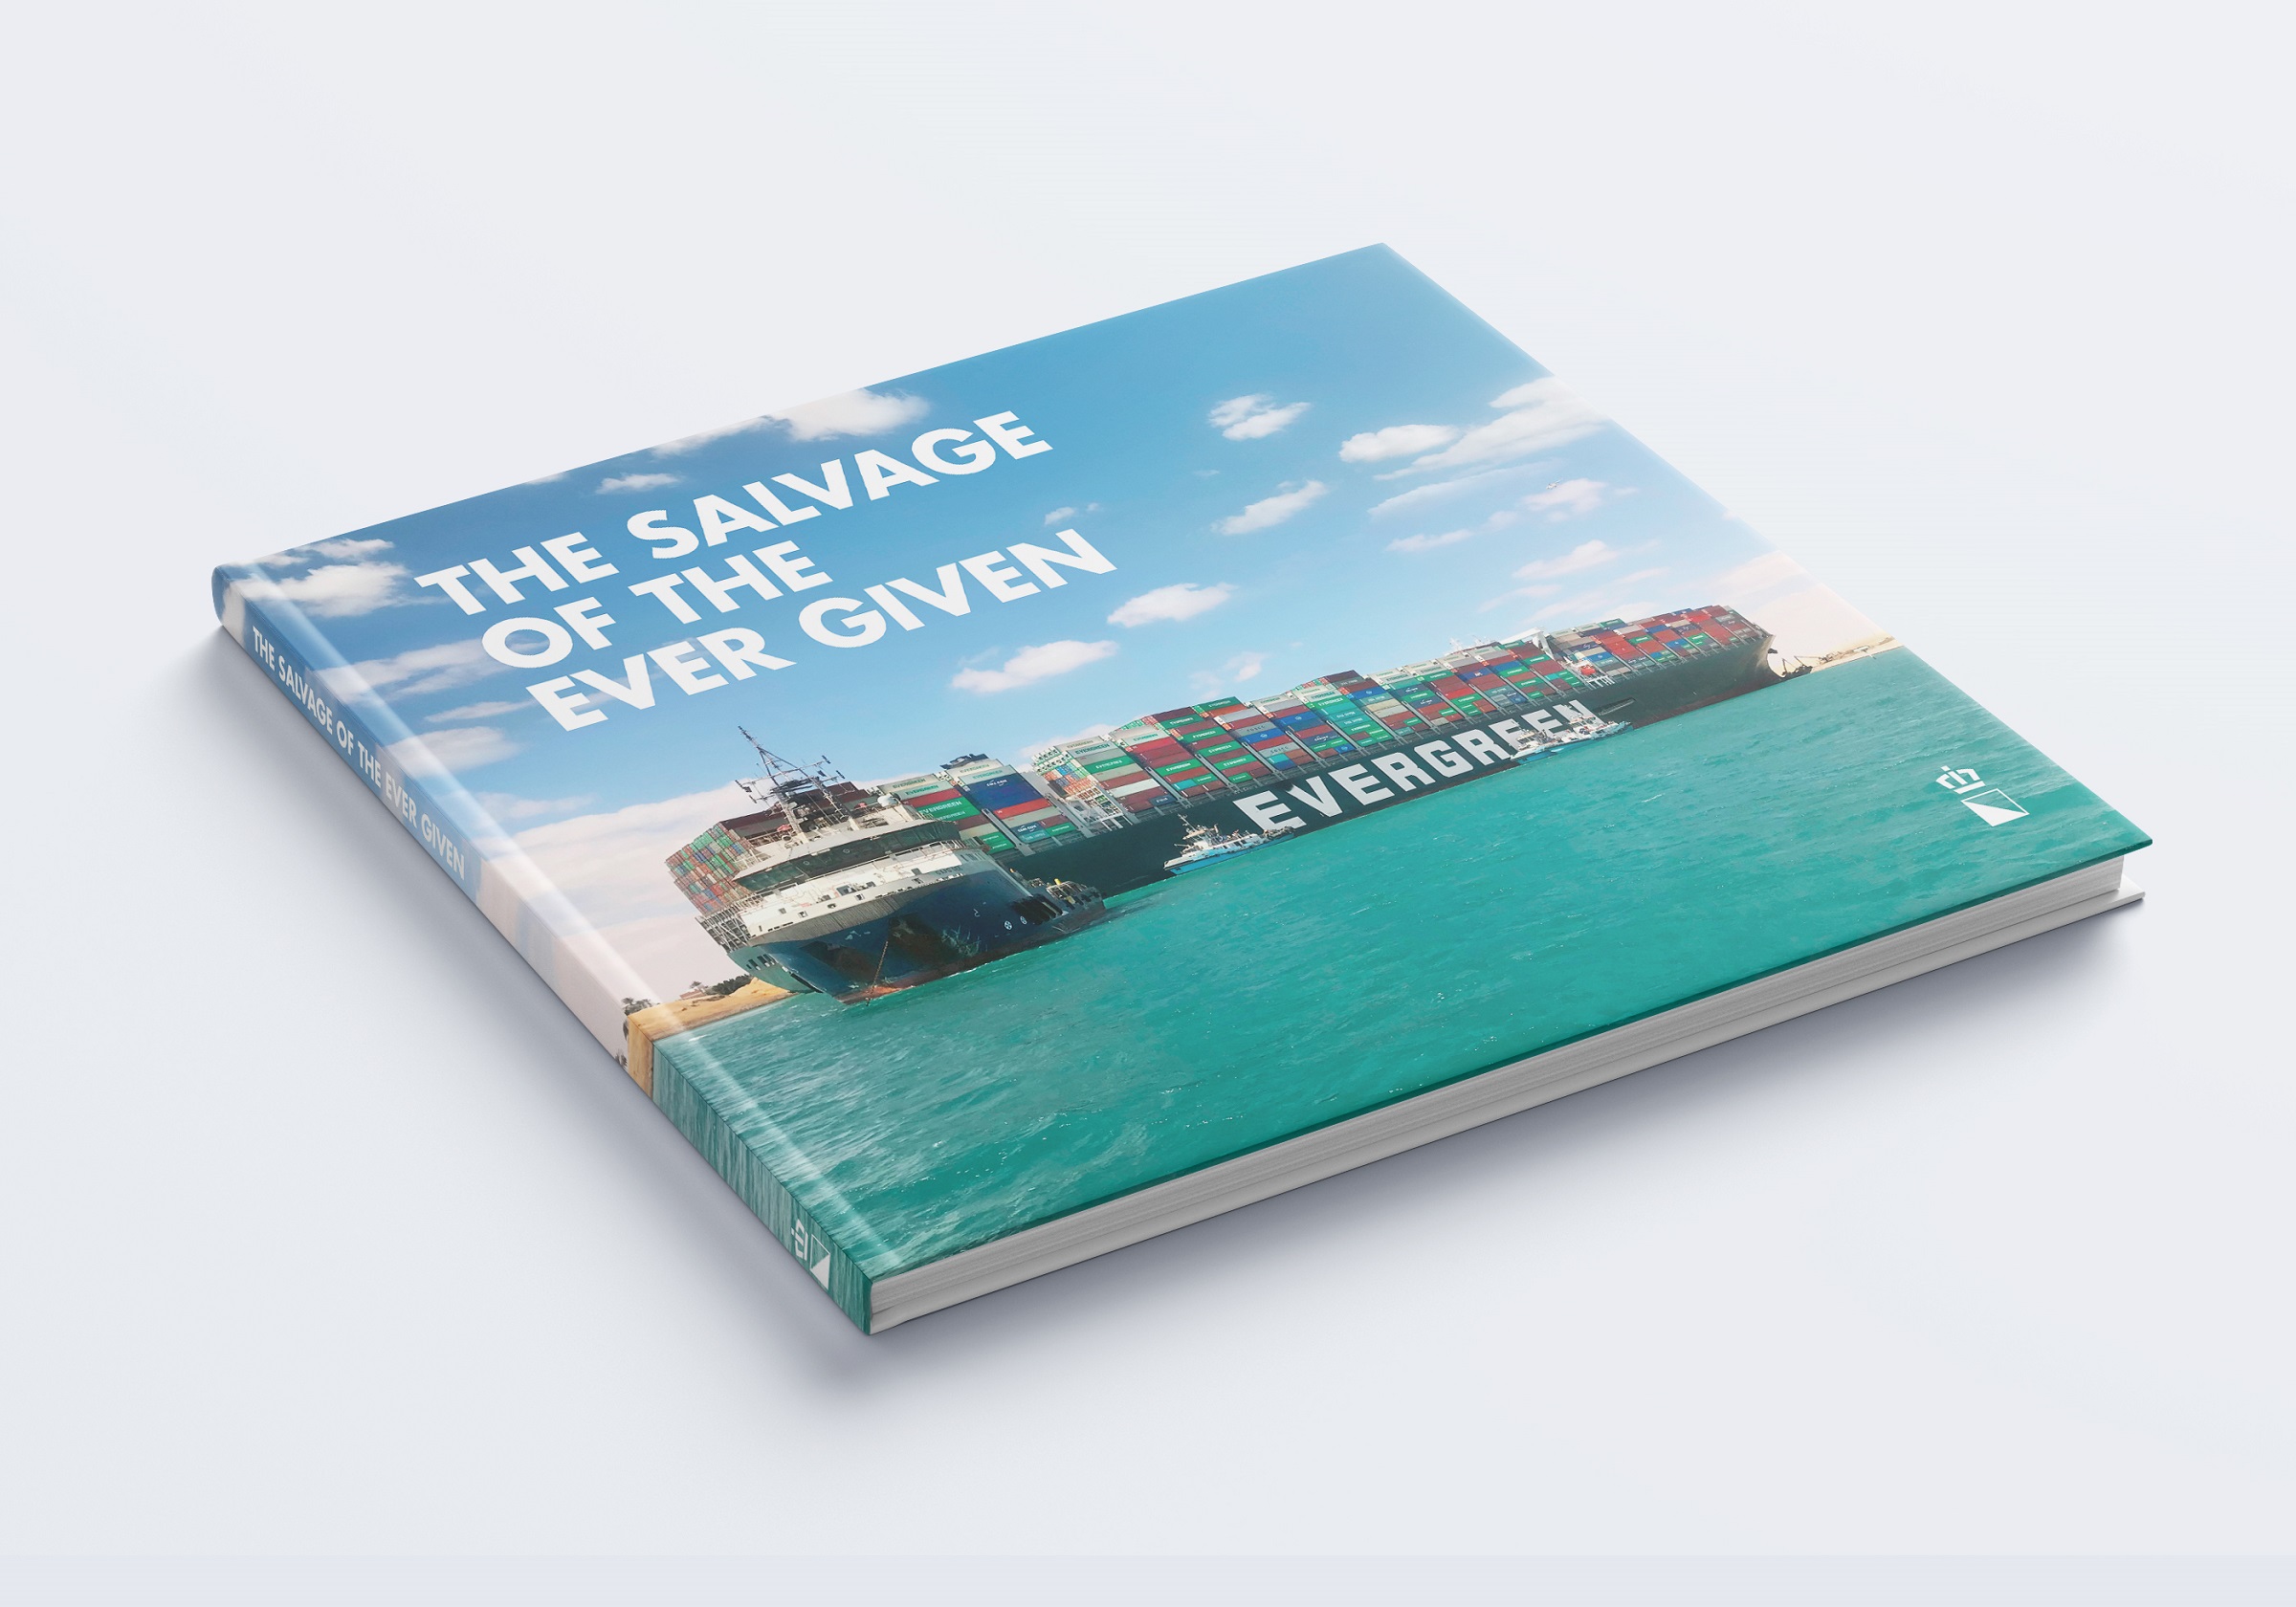 Book published by Boskalis about the salvage of the Ever Given